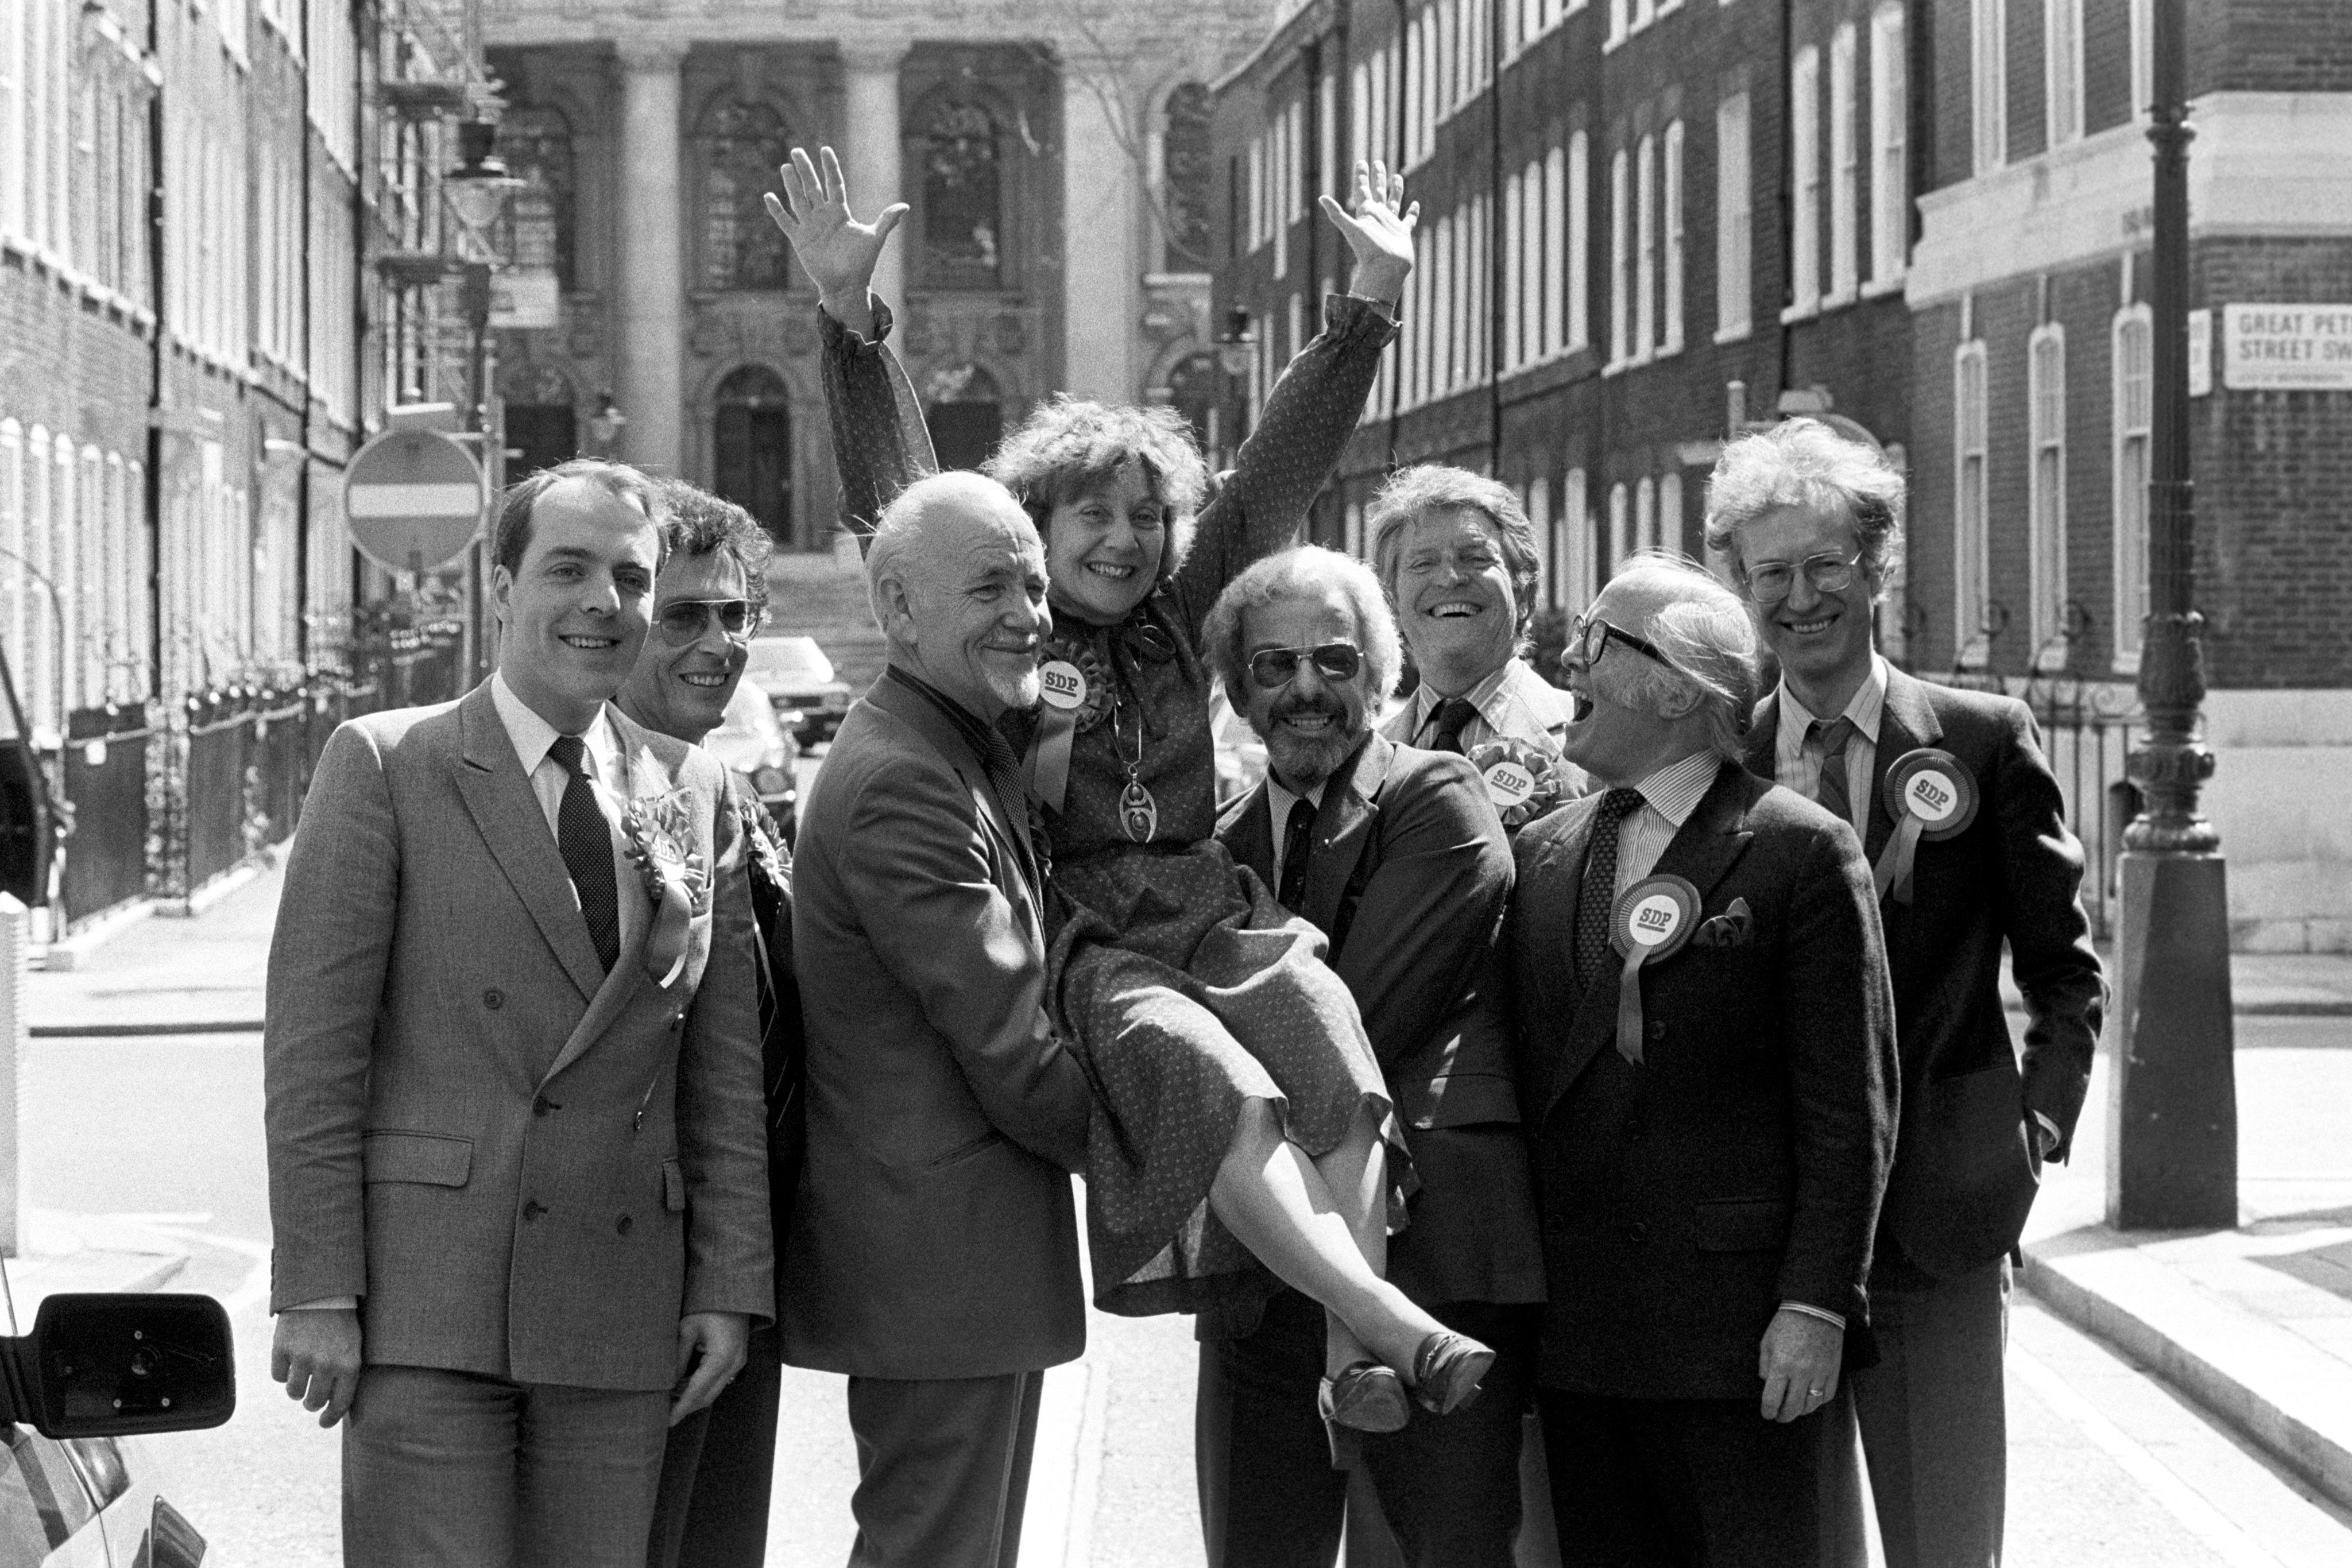 Mrs. Shirley Willaims, President of the Social Democratic Party, appears to be receiving support from the stars at SDP headquaters today. L-R: Simon Cadell, Robert Powell, Steve Race, Barry Cryer, Denis Quilley, Sir Richard Attenborough and Bamber Gascoigne. 11/5/1983